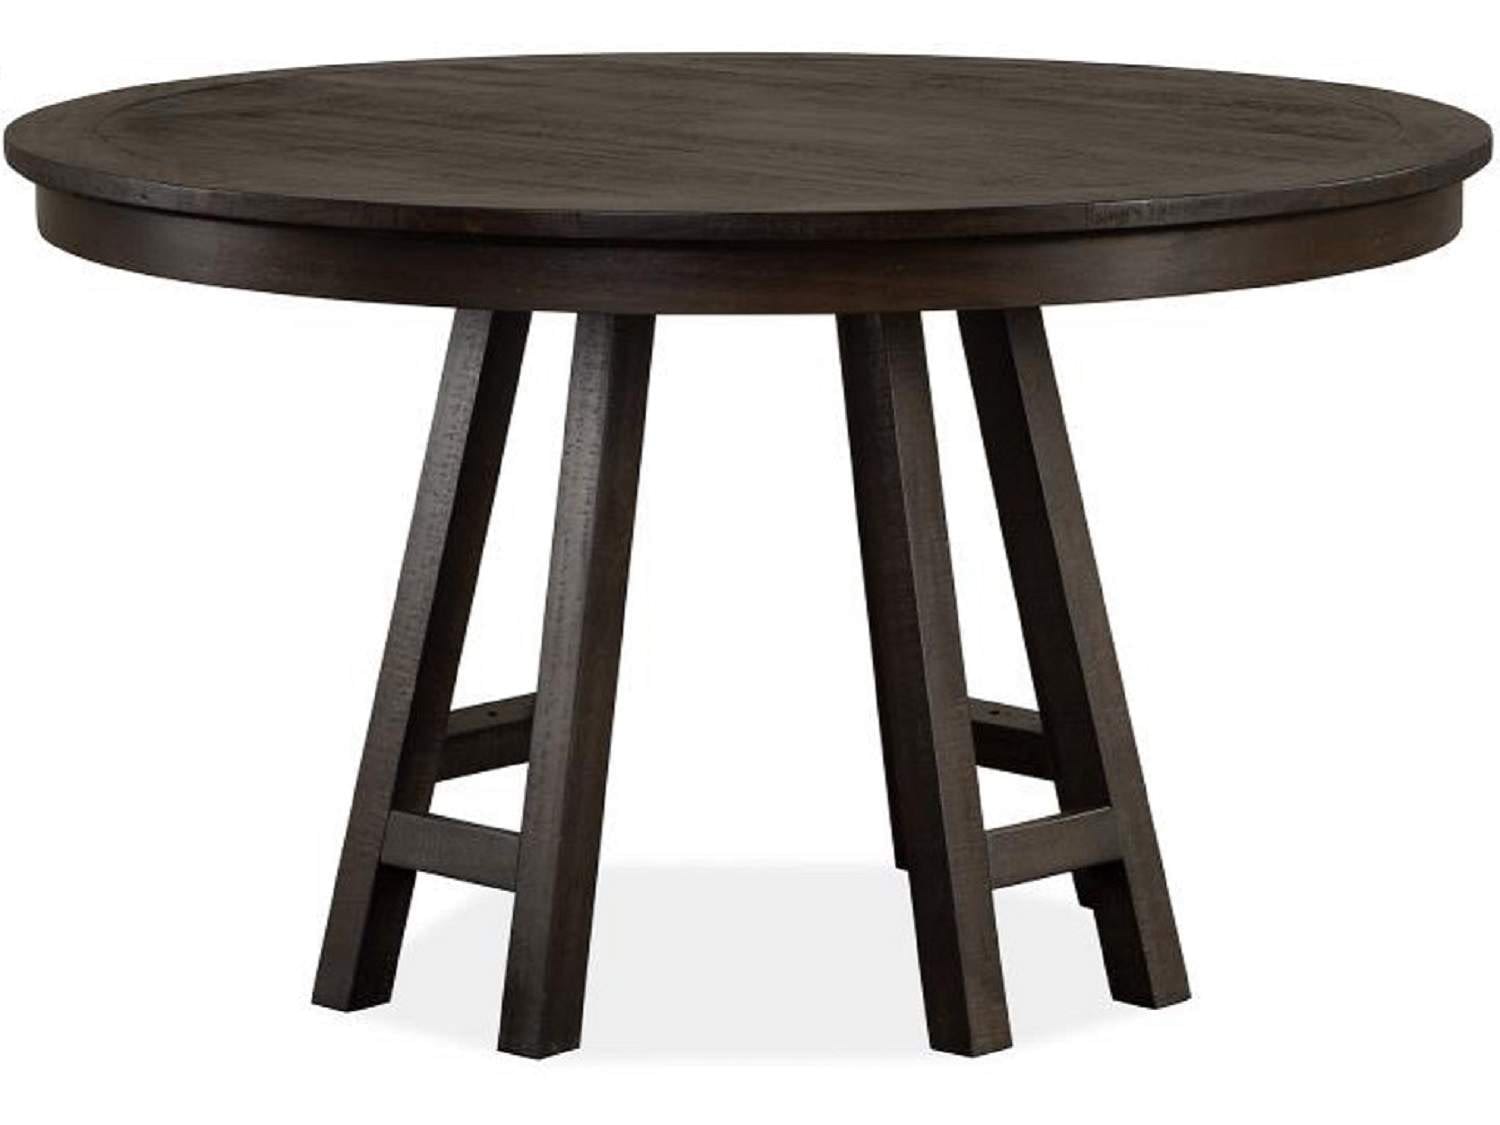 LENORA Dining Table